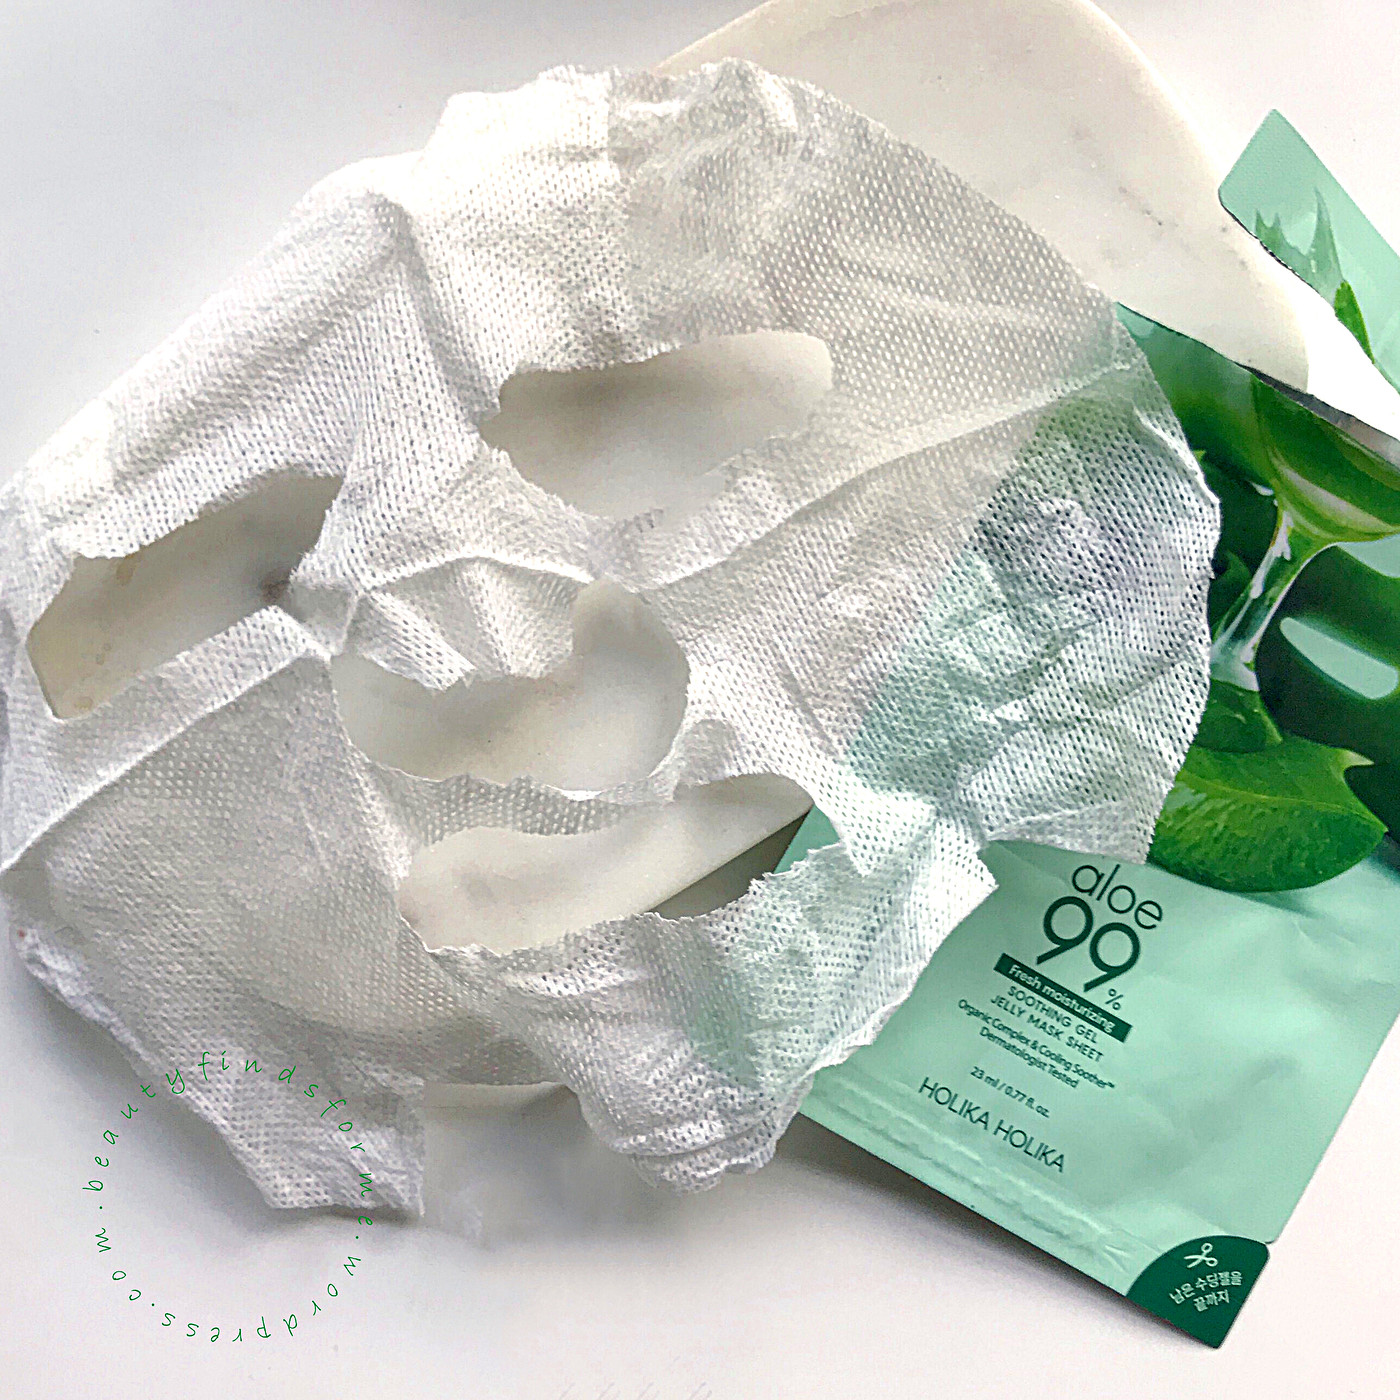 Holika Aloe 99% Soothing Gel Jelly Sheet Mask Review – Unboxing Beauty